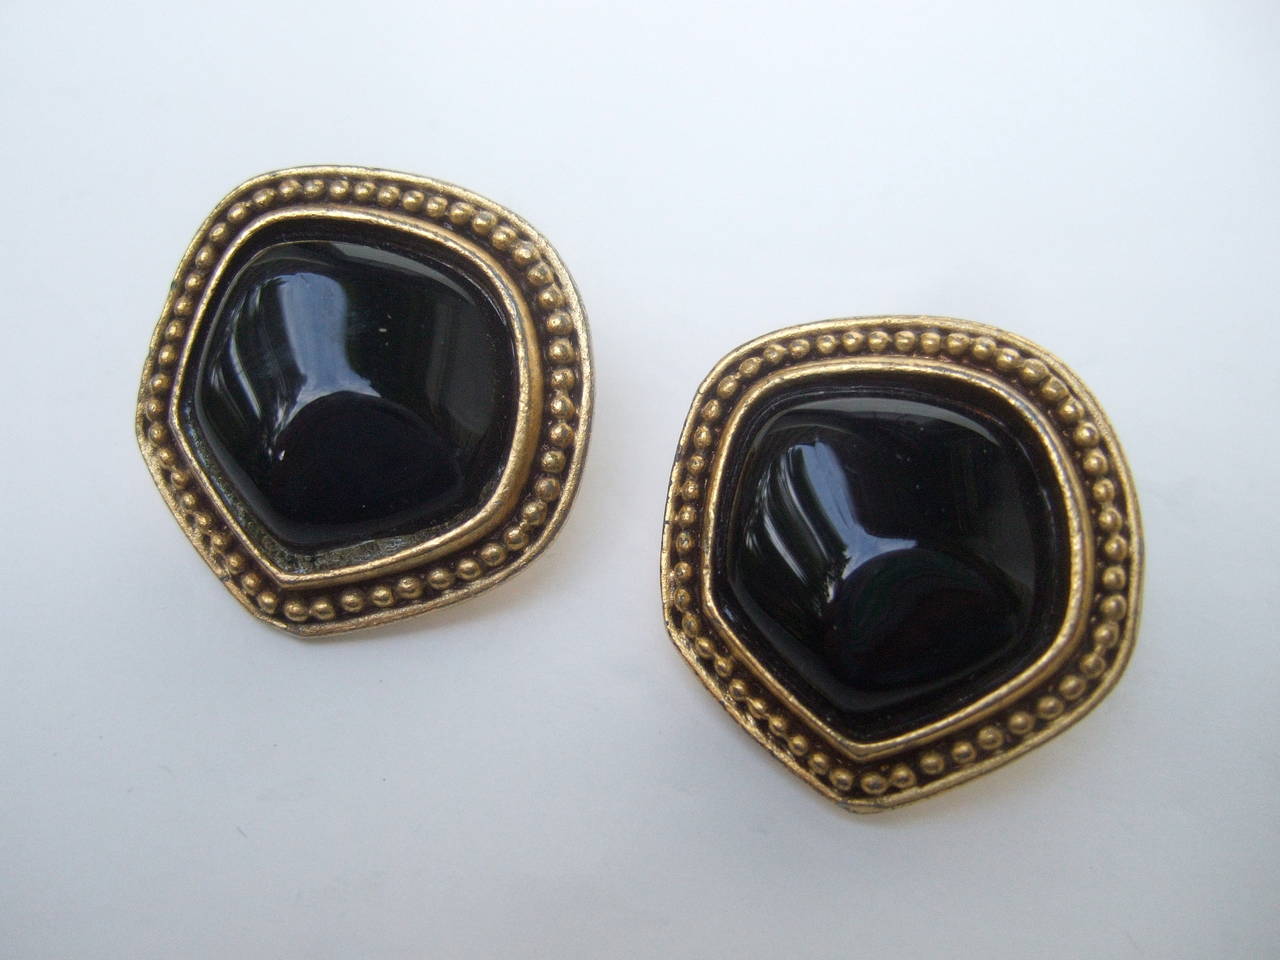 Yves Saint Laurent Poured jet glass button earrings c 1980
The classic button style earrings are designed with glass 
cabochons framed with a gilt metal matte backing

The clip on earrings are stamped: YSL

Measure 1